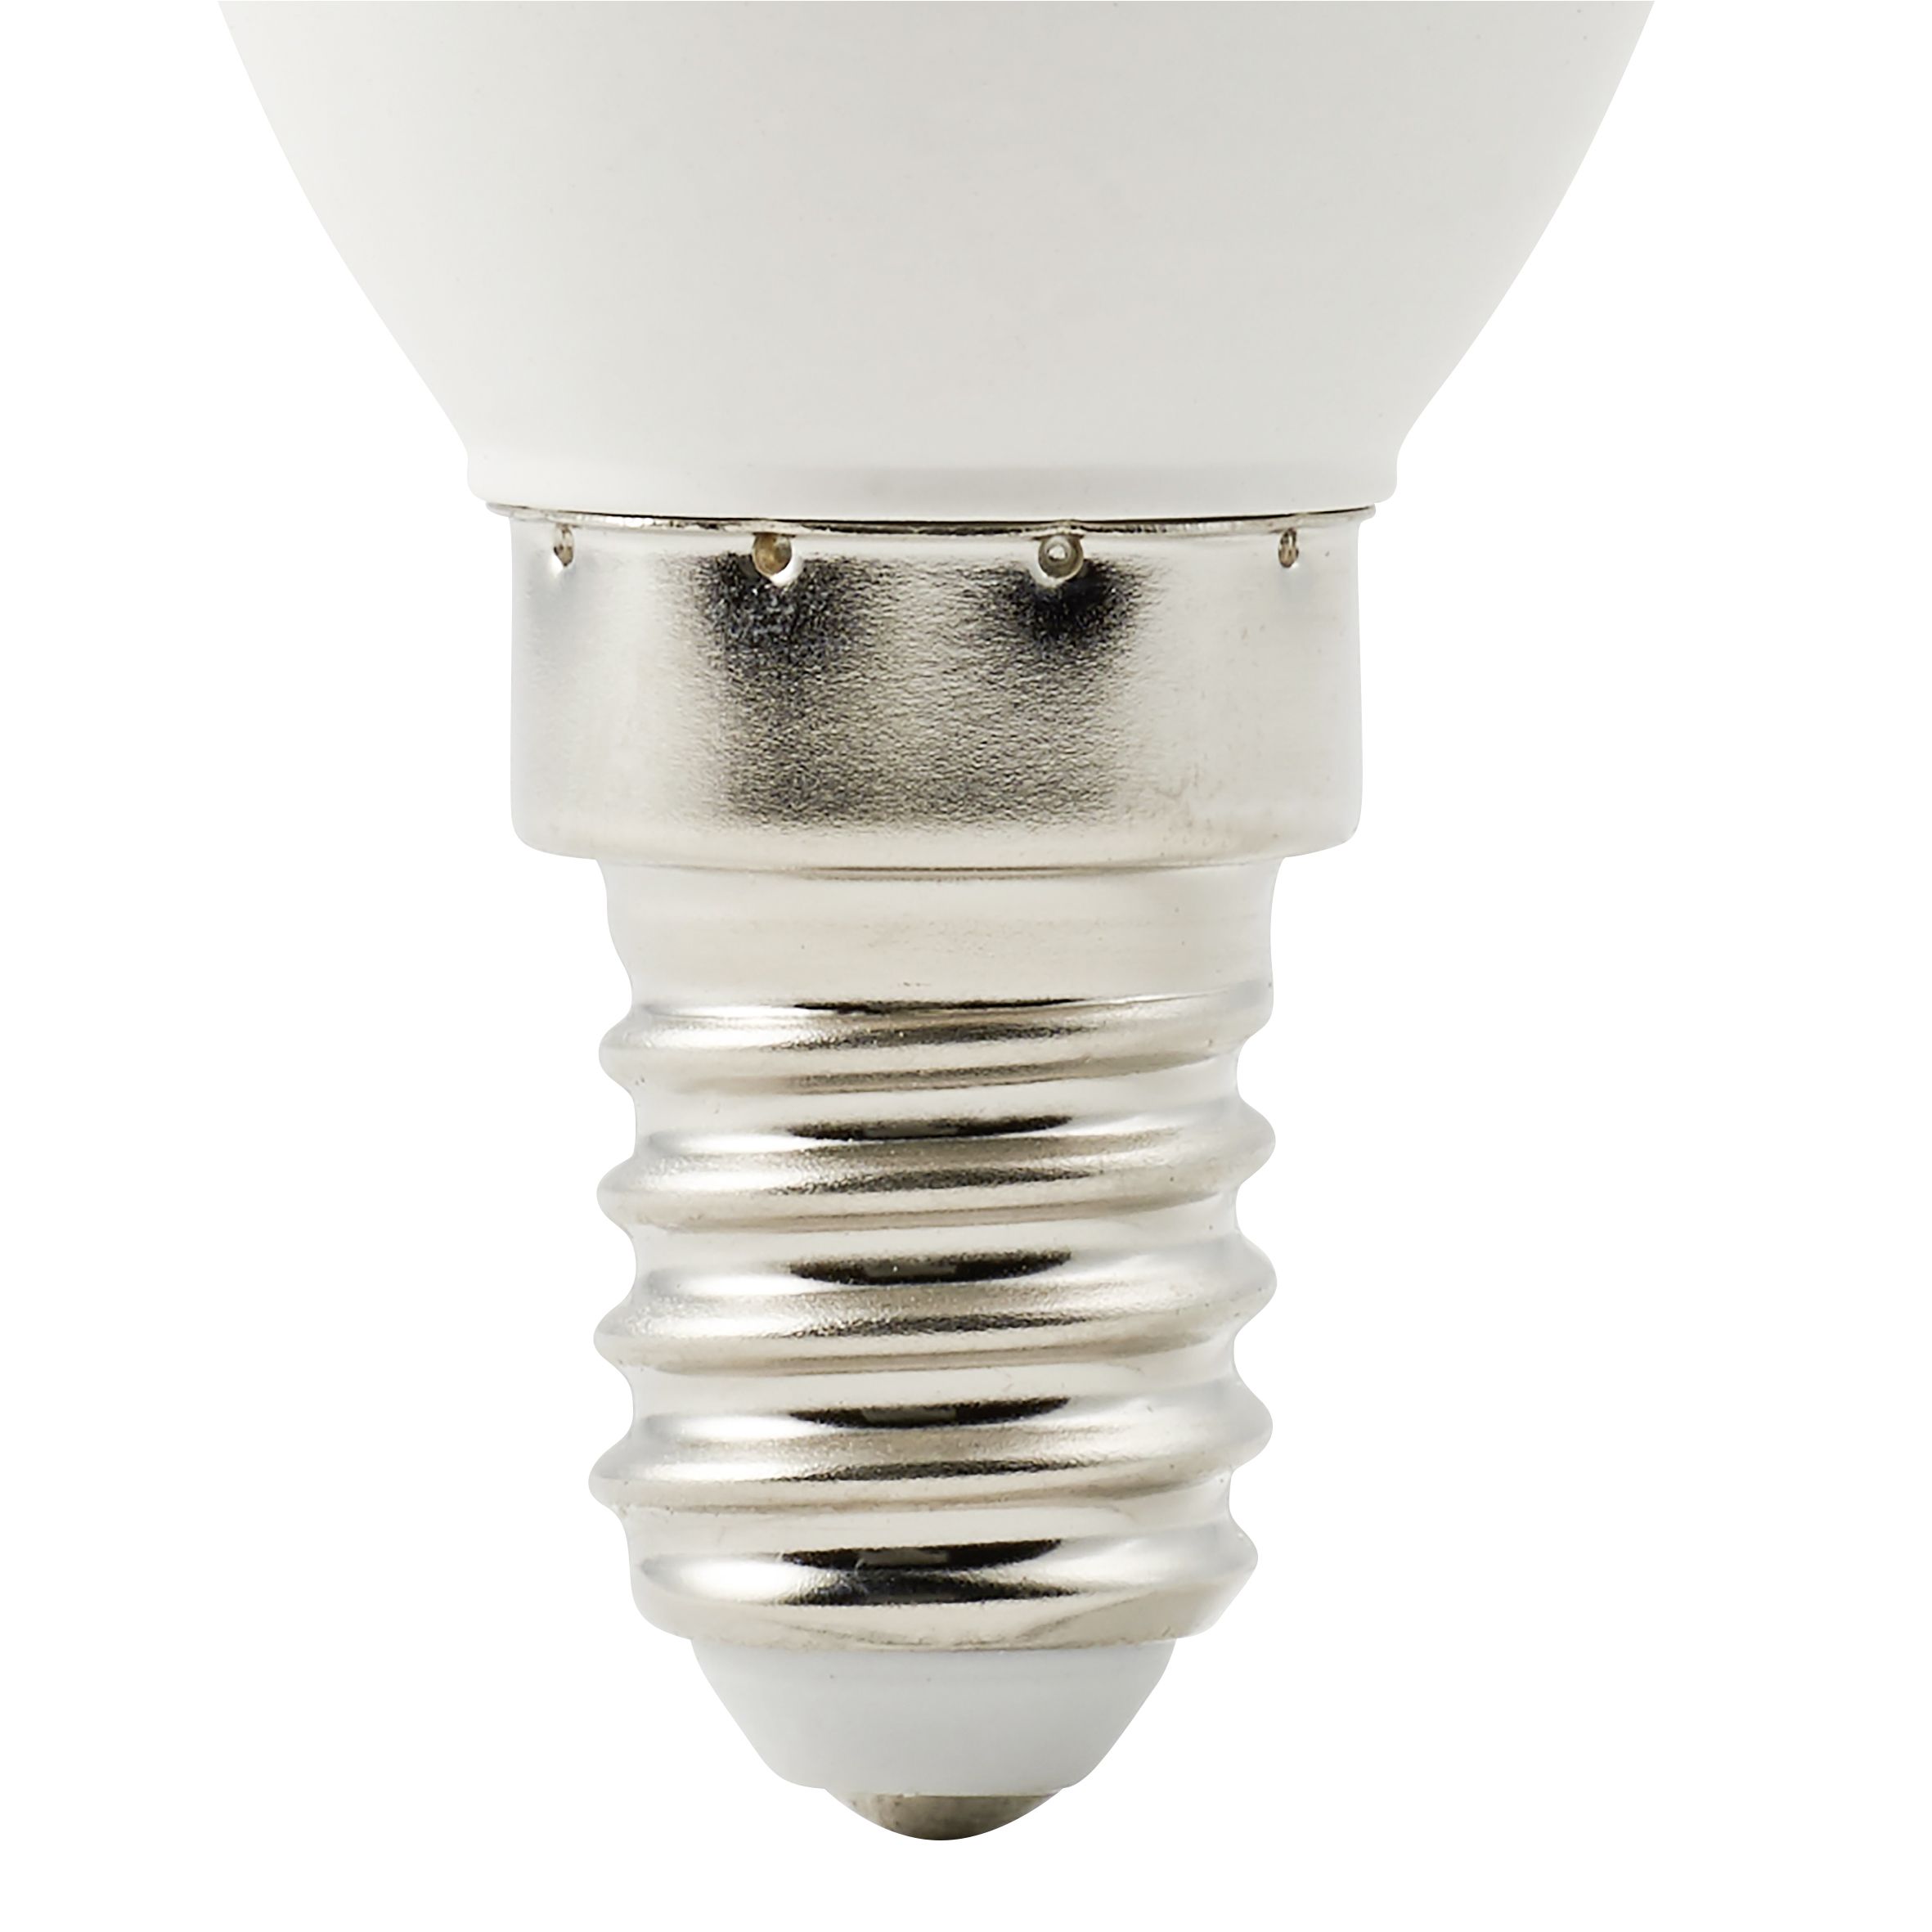 Diall 4.2W 470lm Frosted Candle Neutral white LED Light bulb